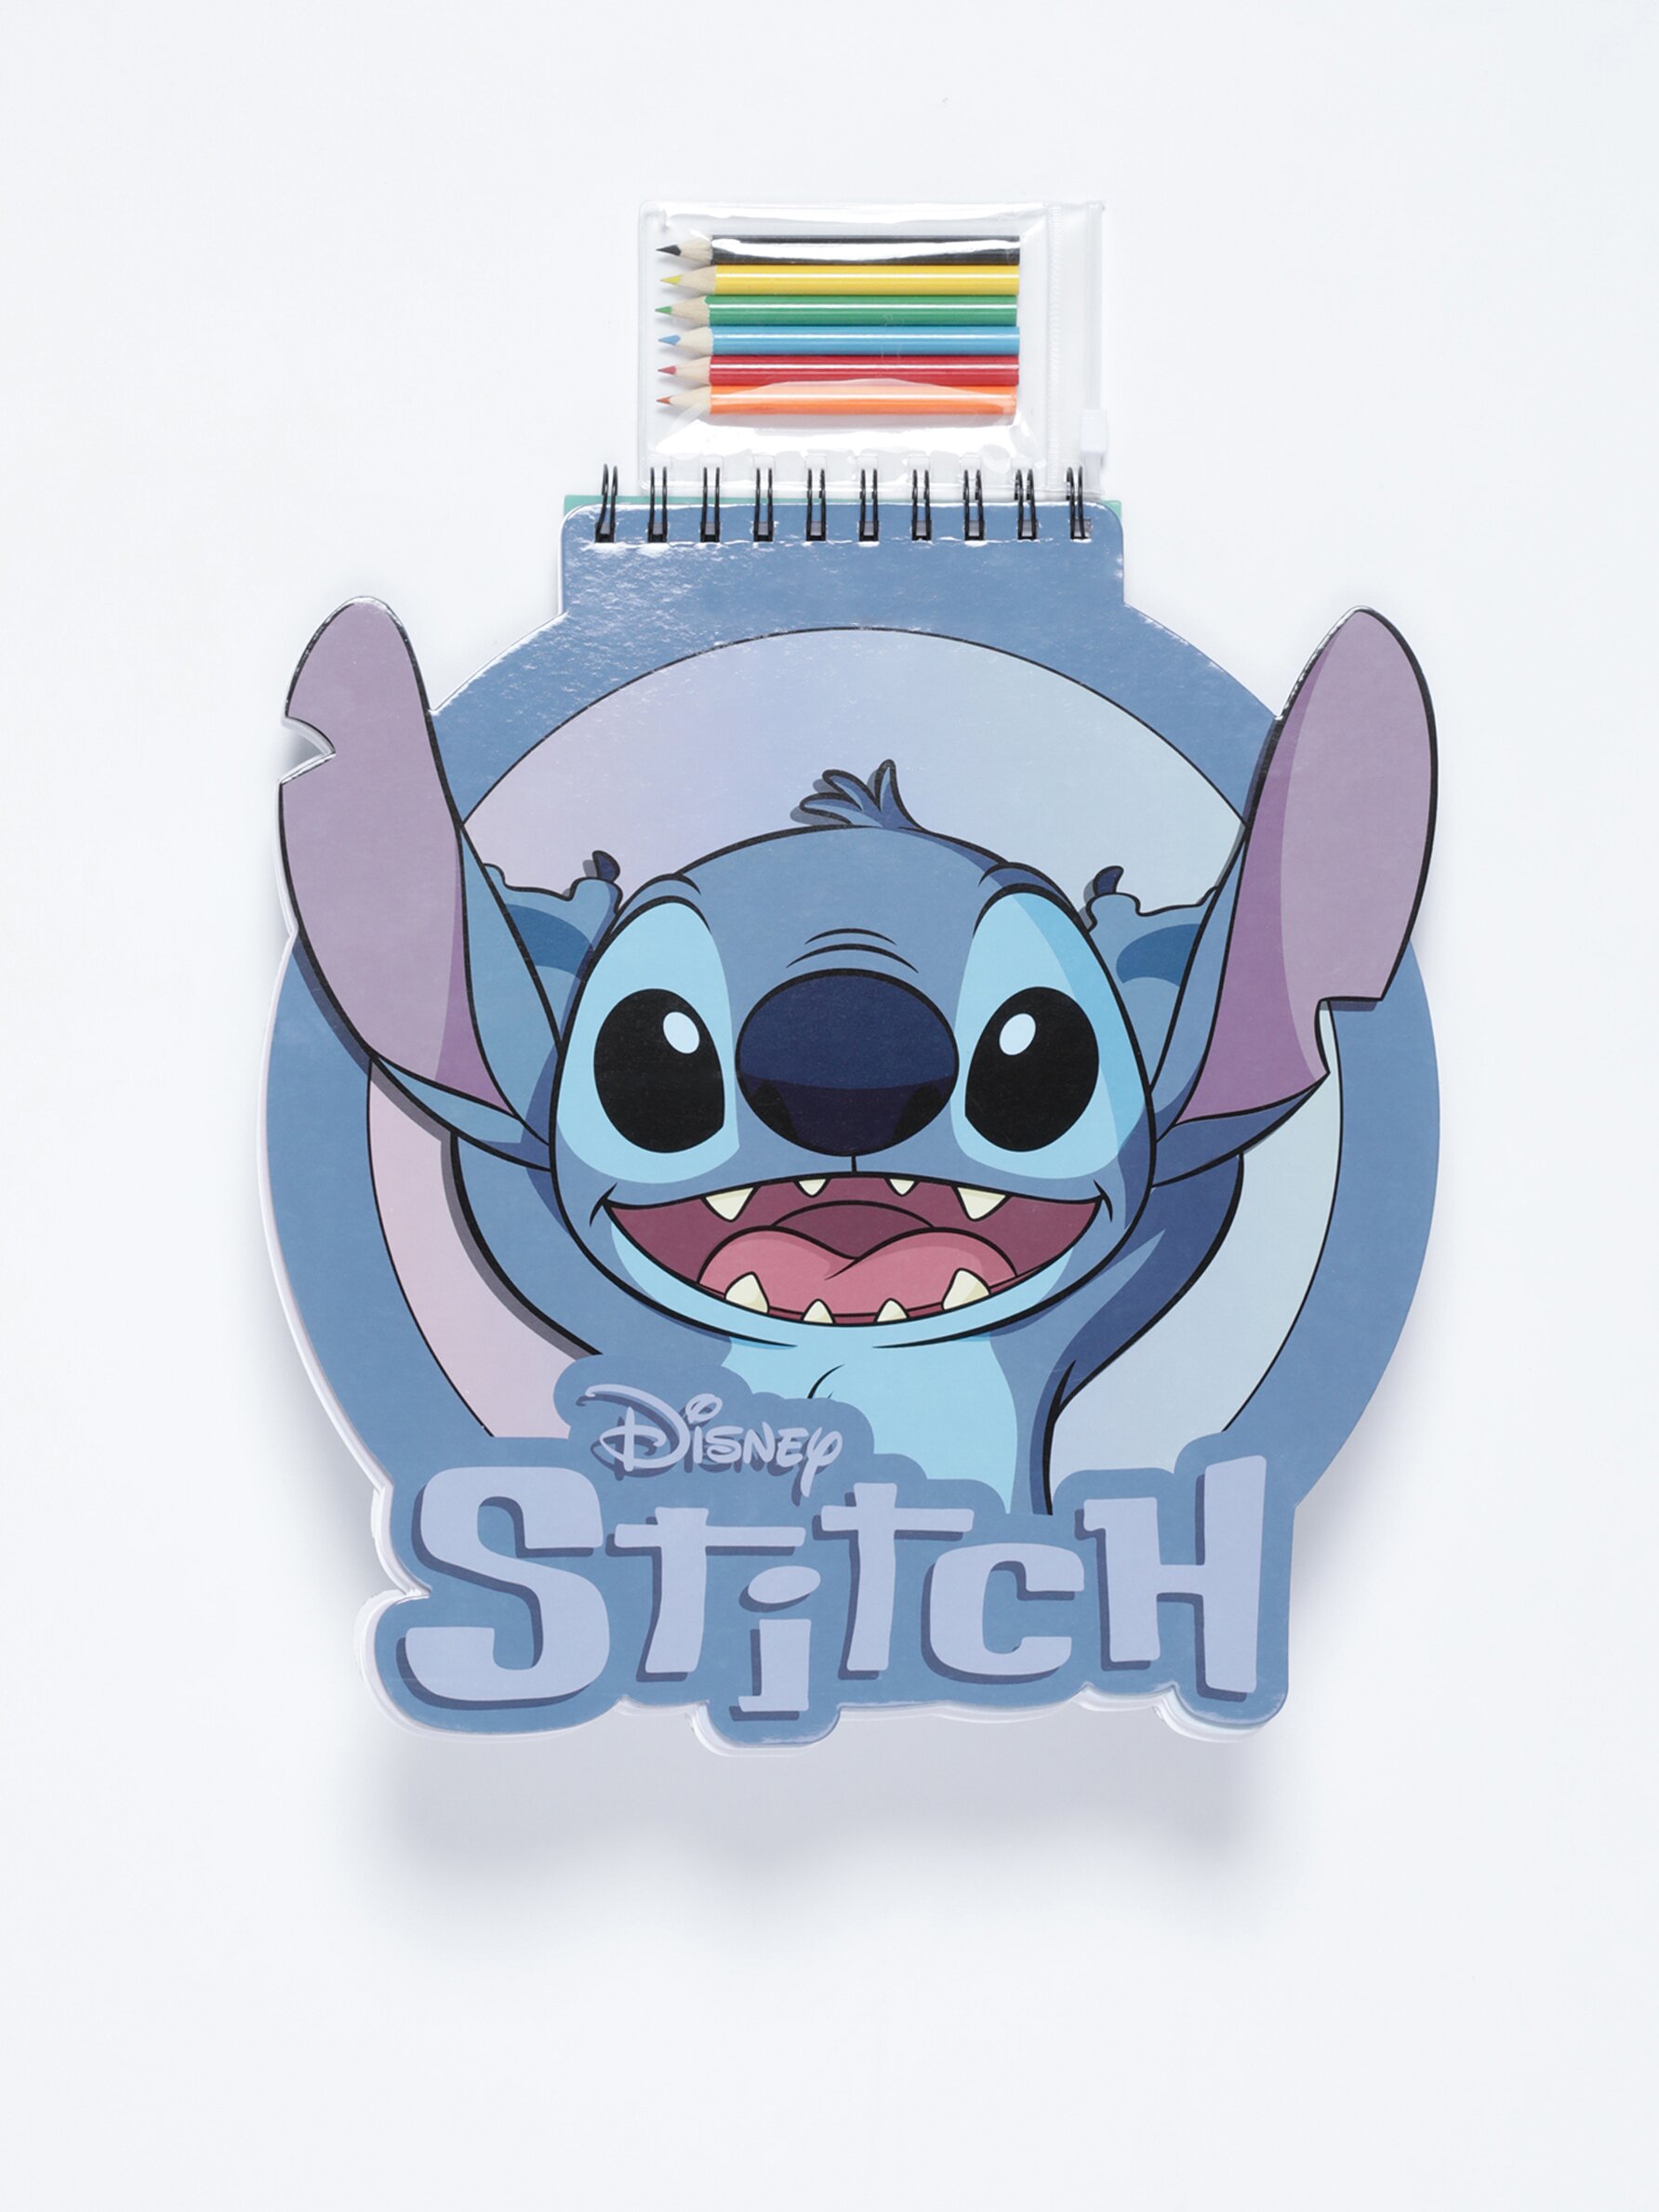 Lilo & Stitch ©Disney pencils and stickers set - Movies - Collabs